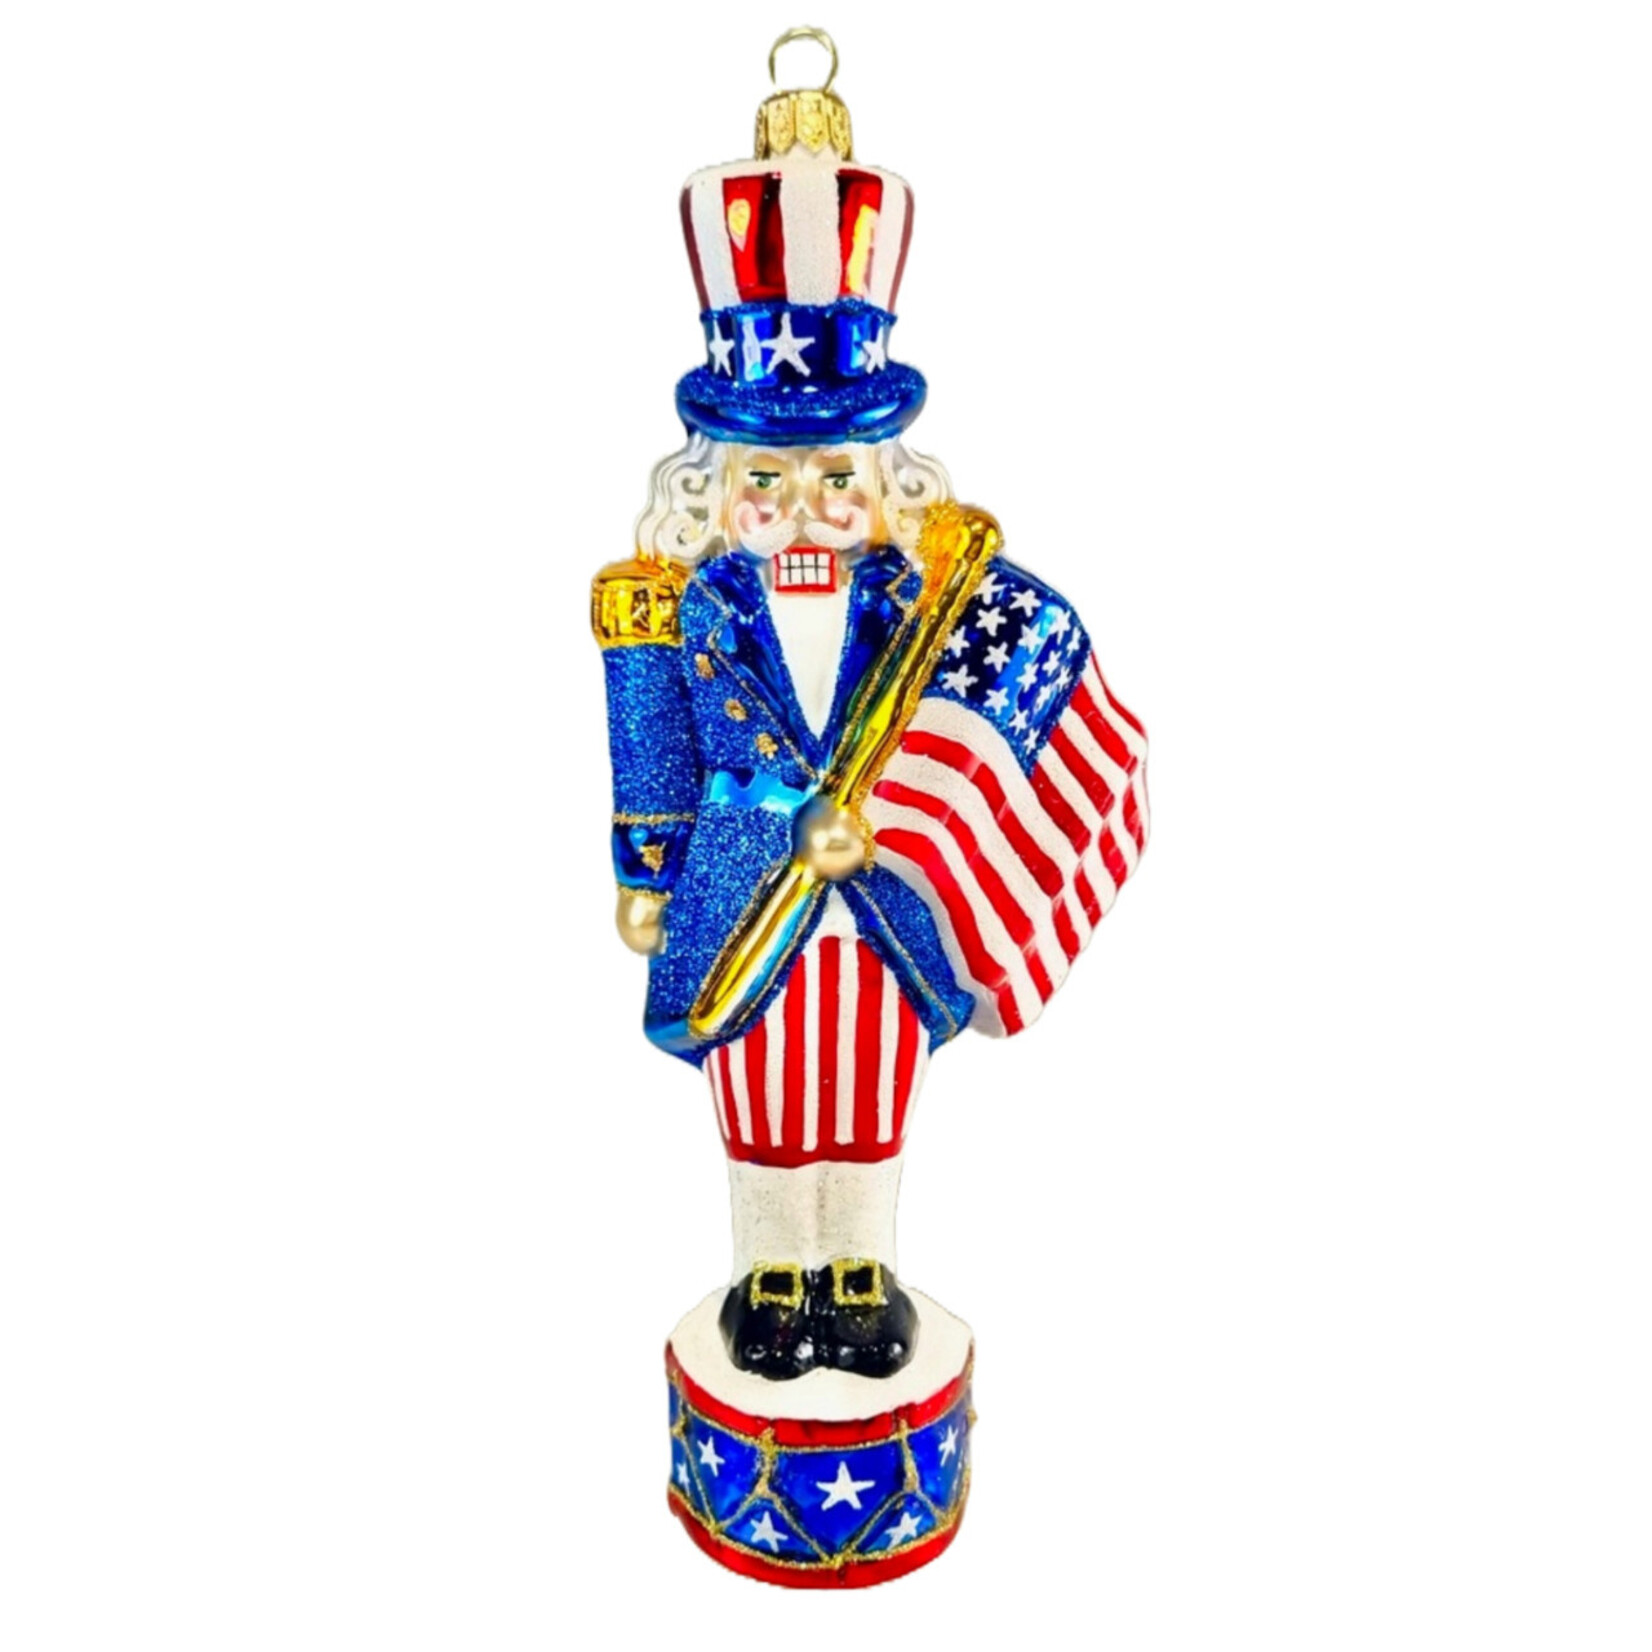 Christopher Radko AMERICAN PRIDE ORNAMENT BY HEARTFULLY YOURS 8" (PREORDER NOW)